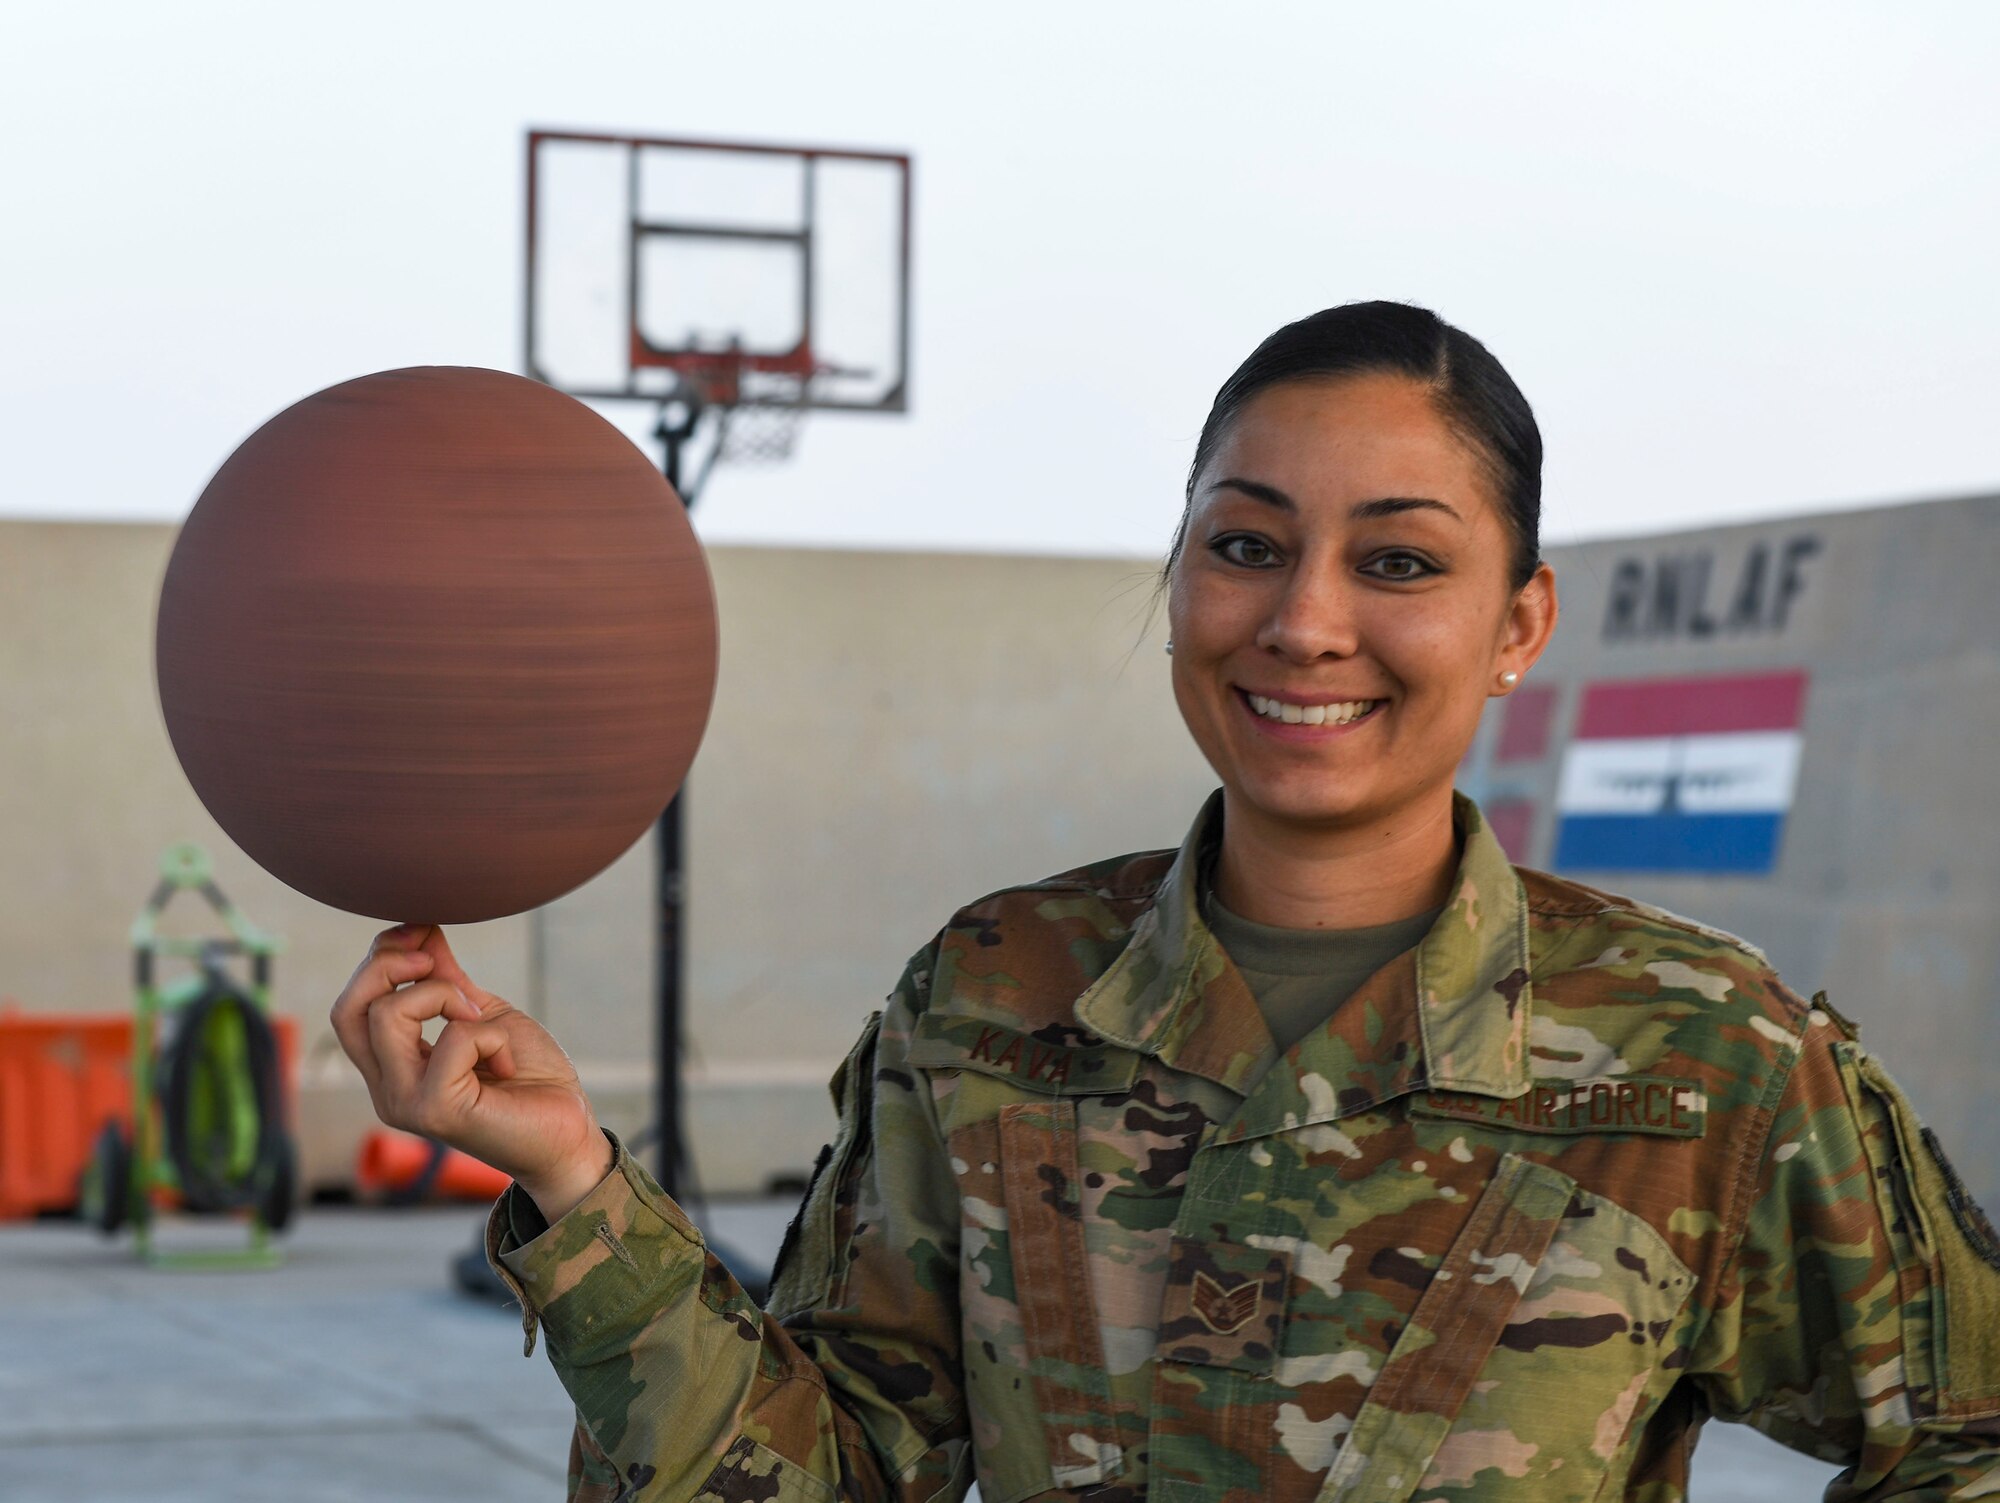 U.S. Air Force Staff Sgt. Cinnamon Kava, 5th Expeditionary Air Mobility Squadron combat oriented support operations supply specialist, spins a basketball on her fingertips at Ali Al Salem Air Base, Kuwait, Nov. 19, 2020.